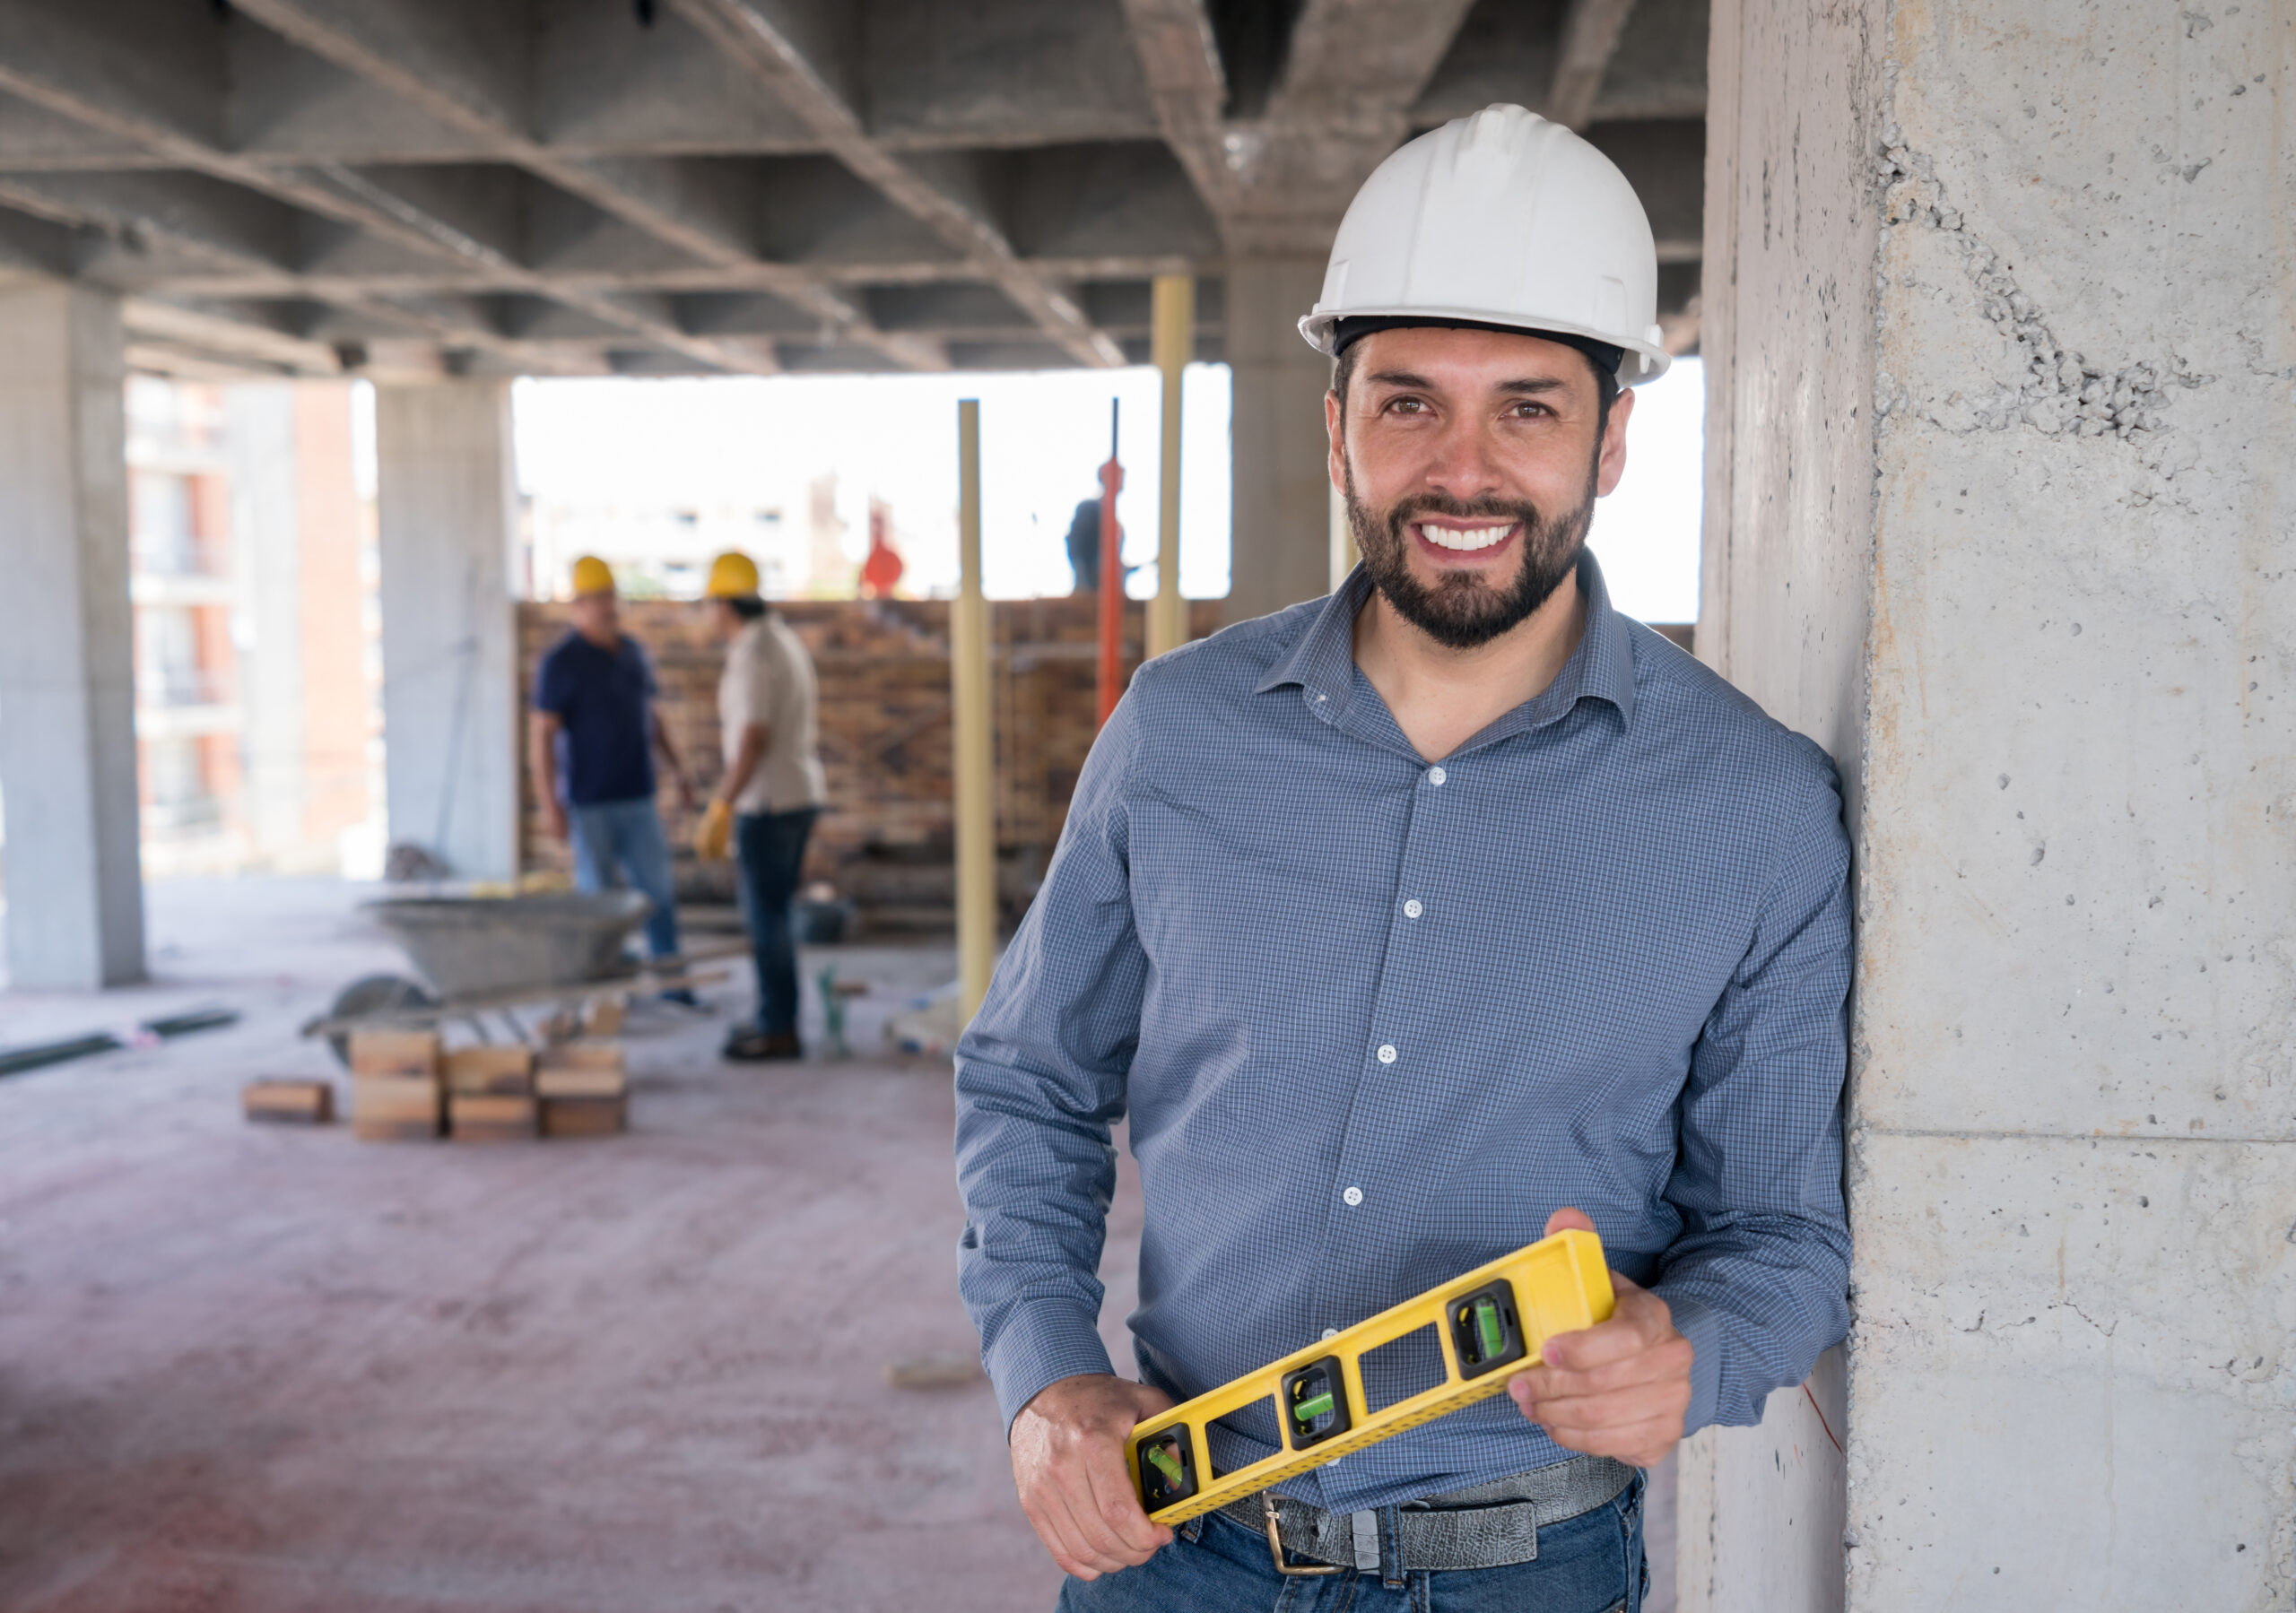 Portrait of a happy engineer at a construction site holding a level tool and looking at the camera smiling